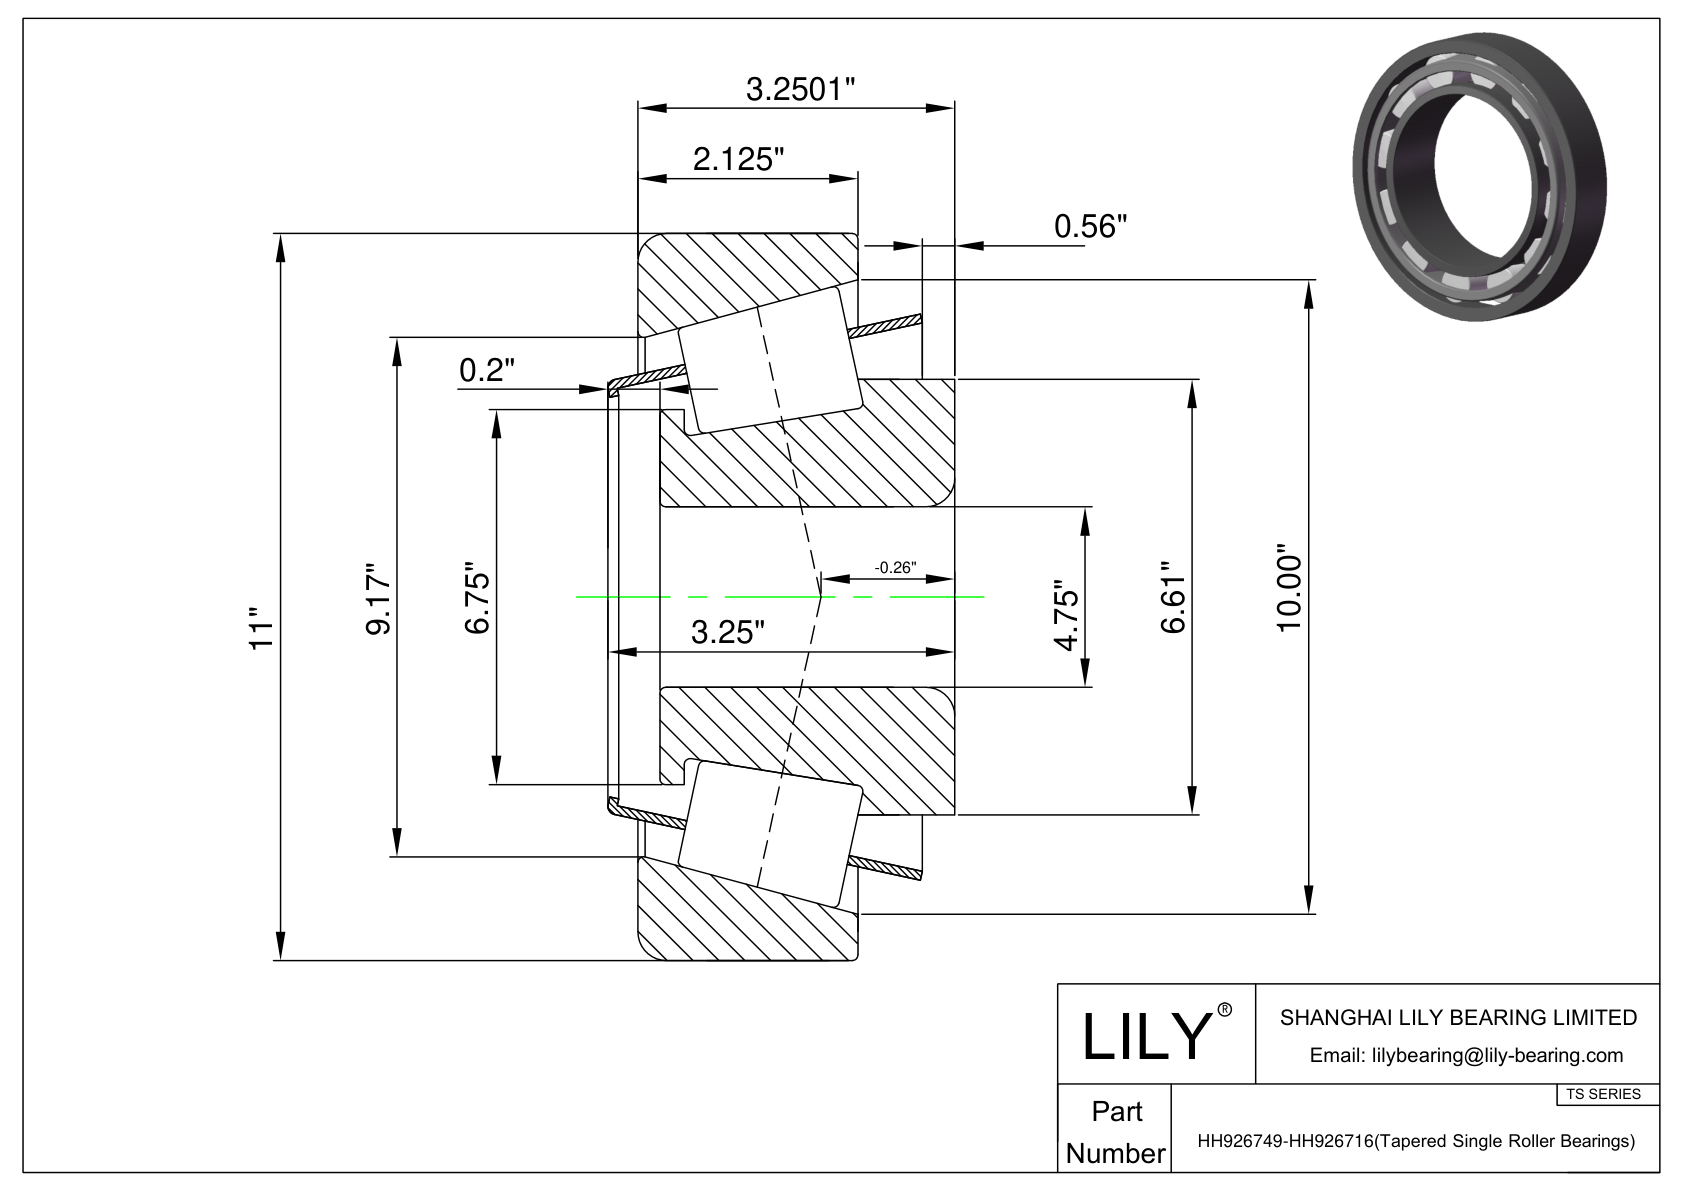 HH926749-HH926716 TS (Tapered Single Roller Bearings) (Imperial) cad drawing